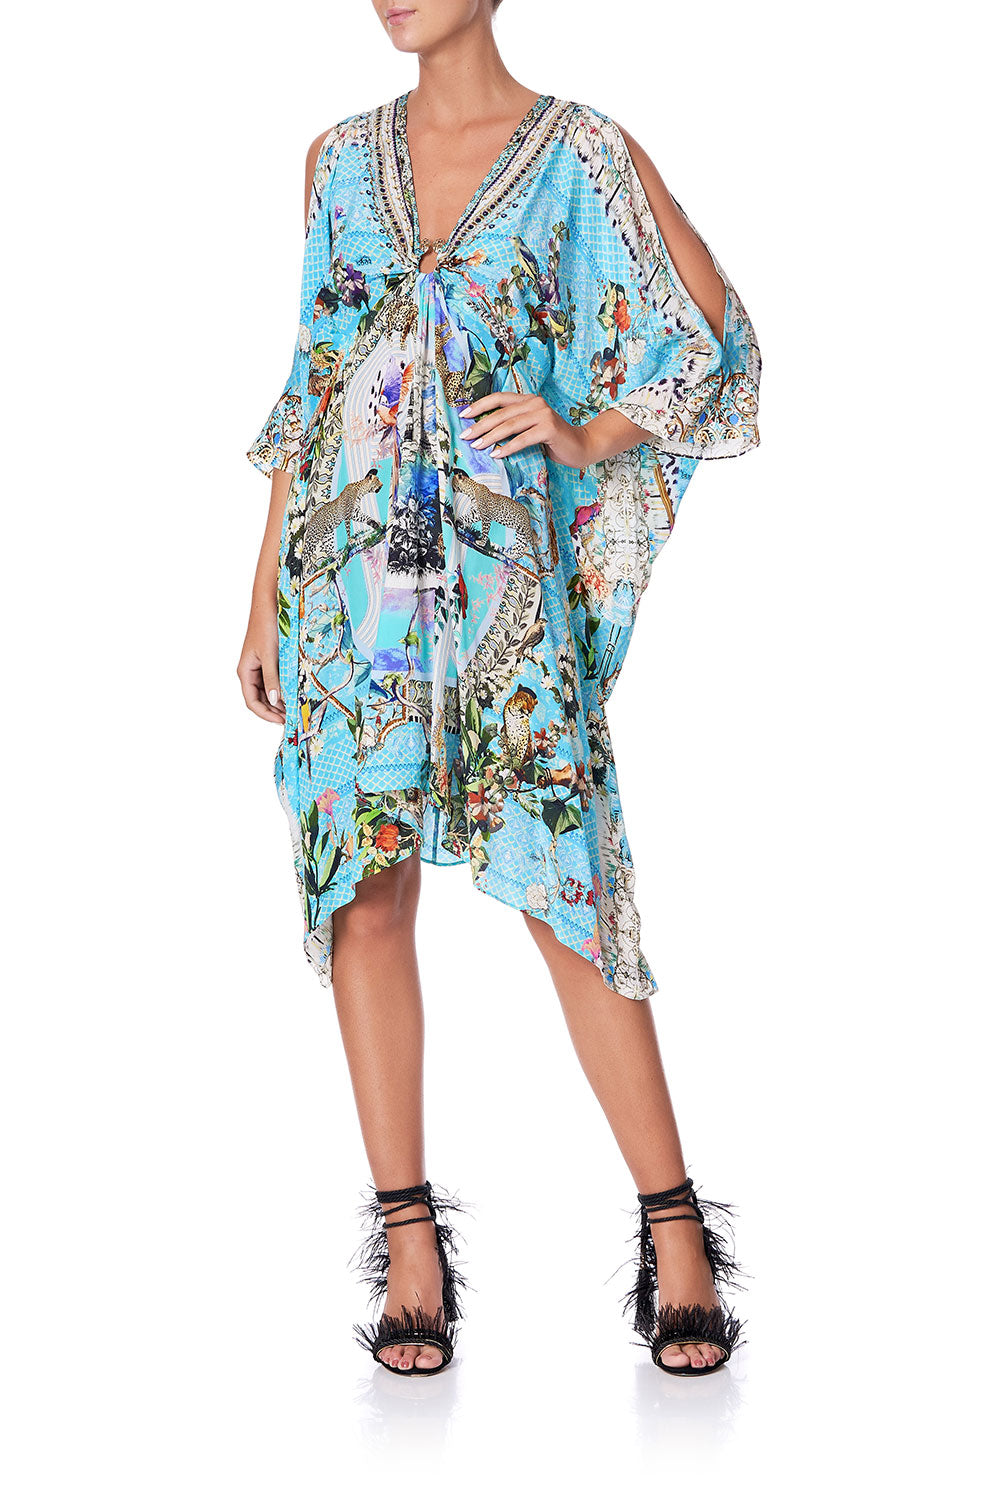 SHORT KAFTAN WITH HARDWARE GIRL FROM ST TROPEZ – CAMILLA